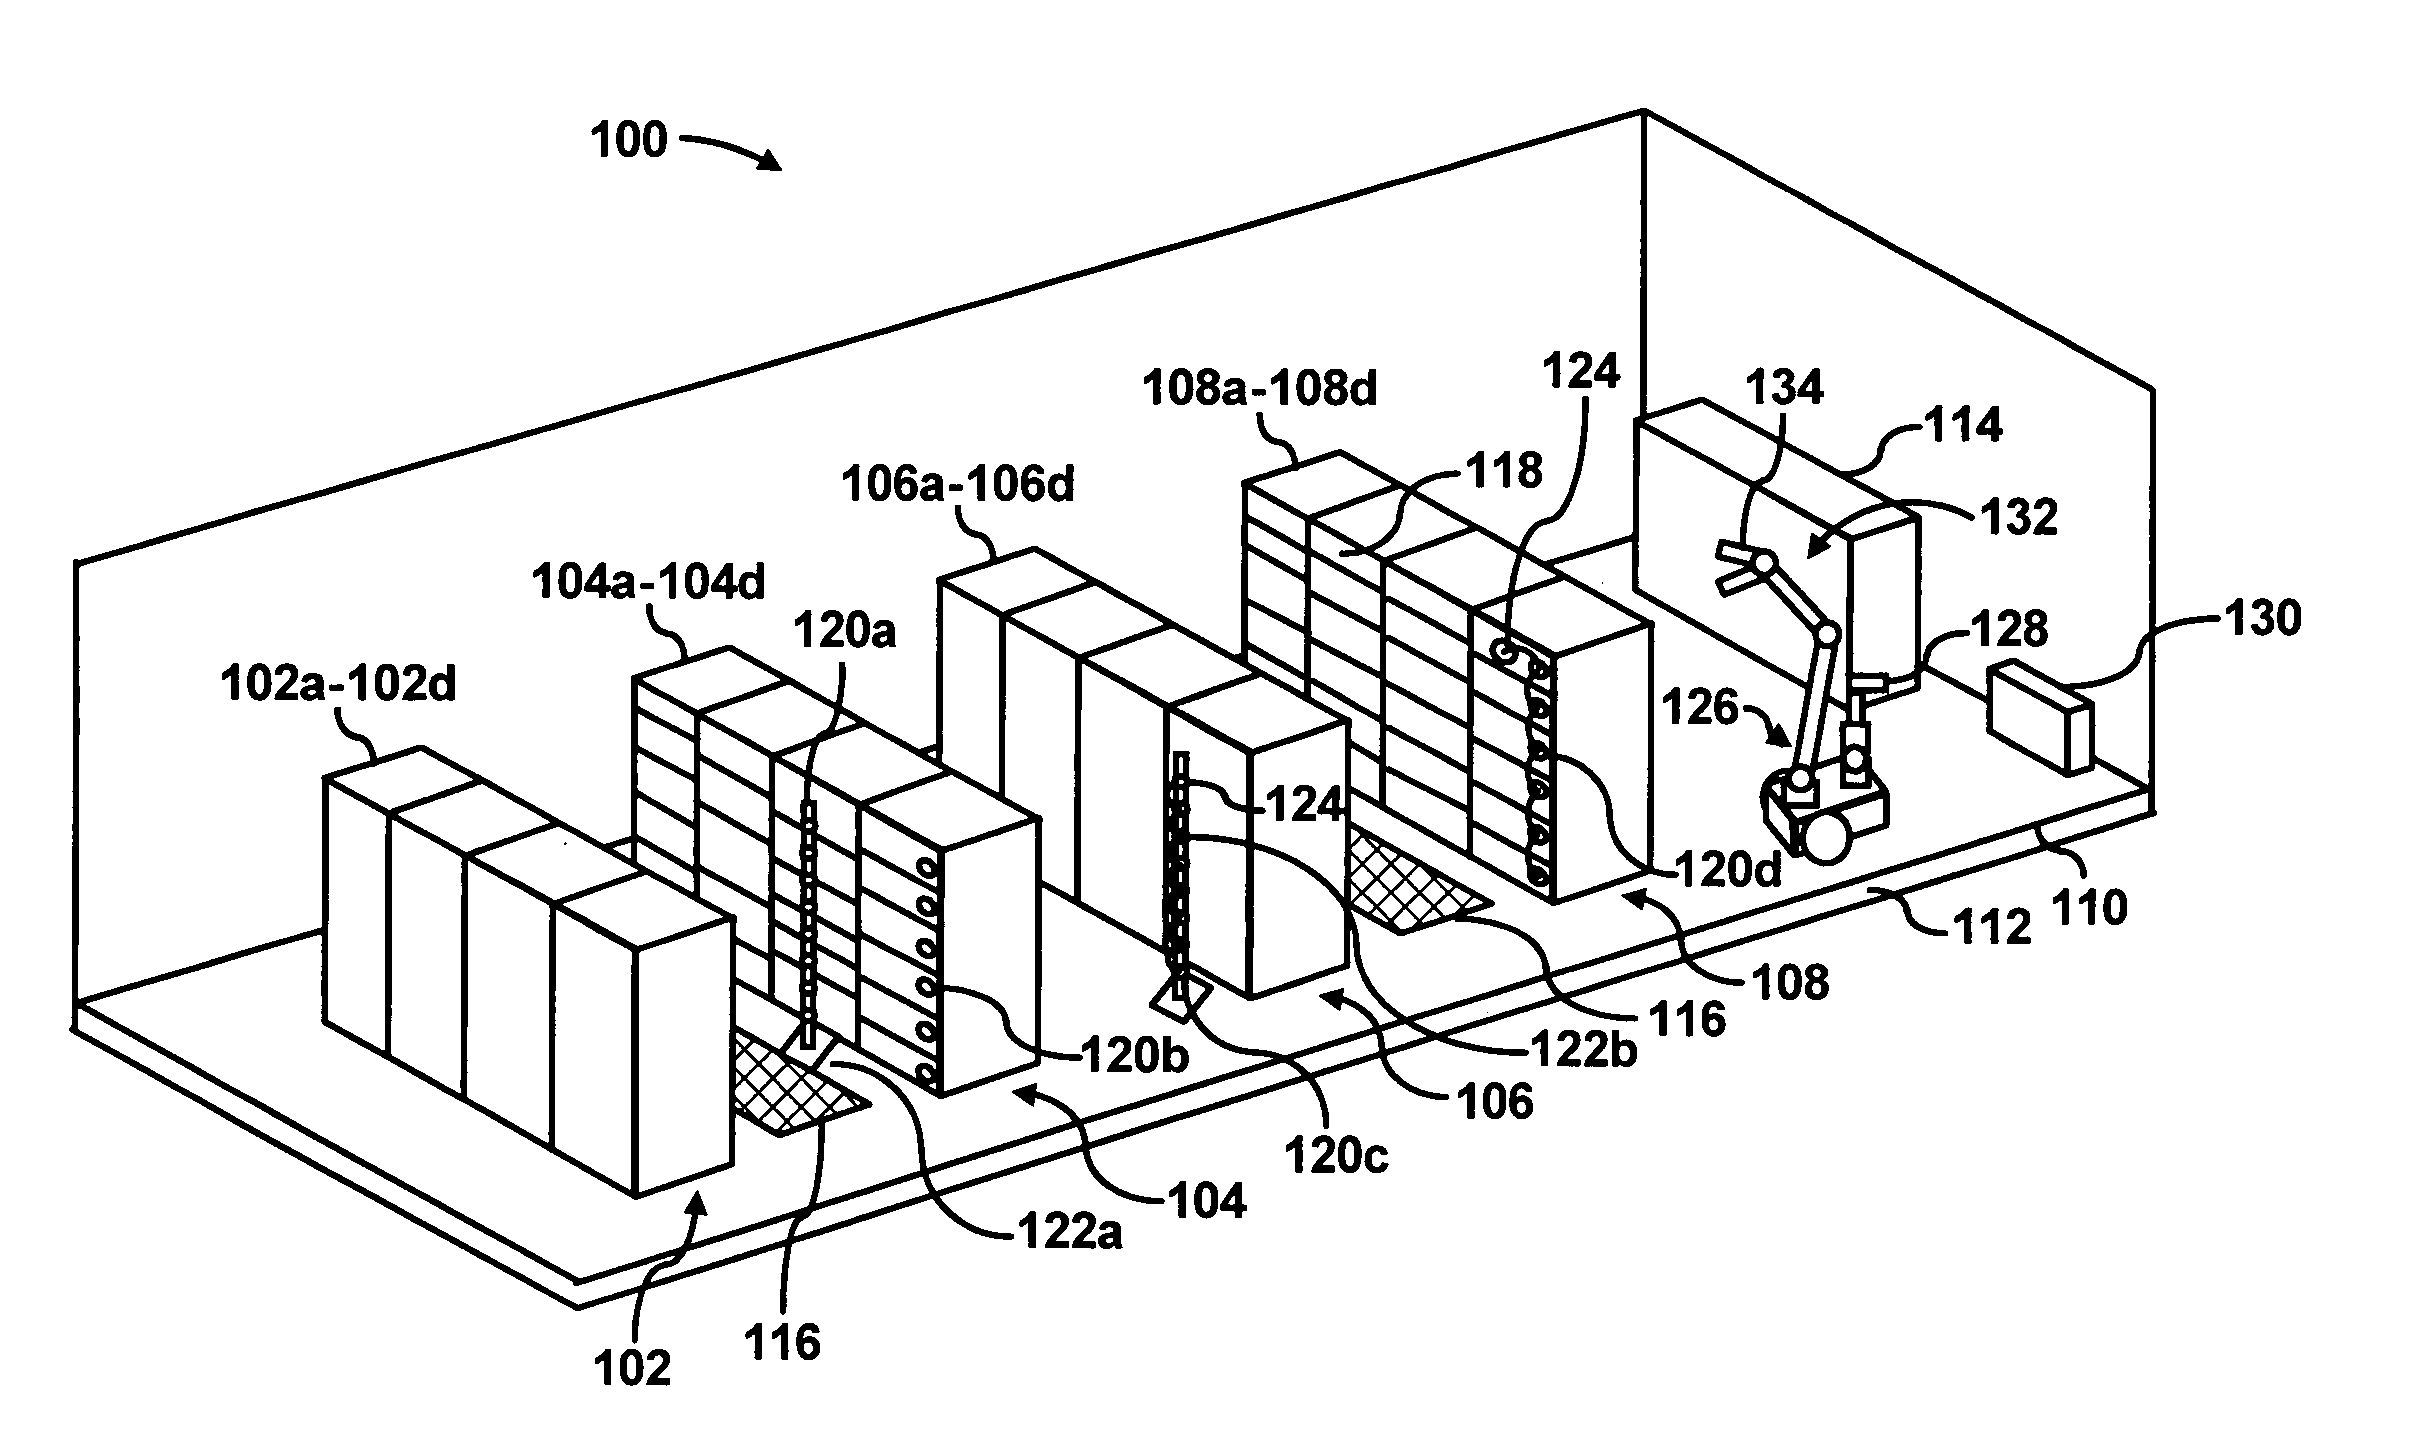 Data collection system having a data collector